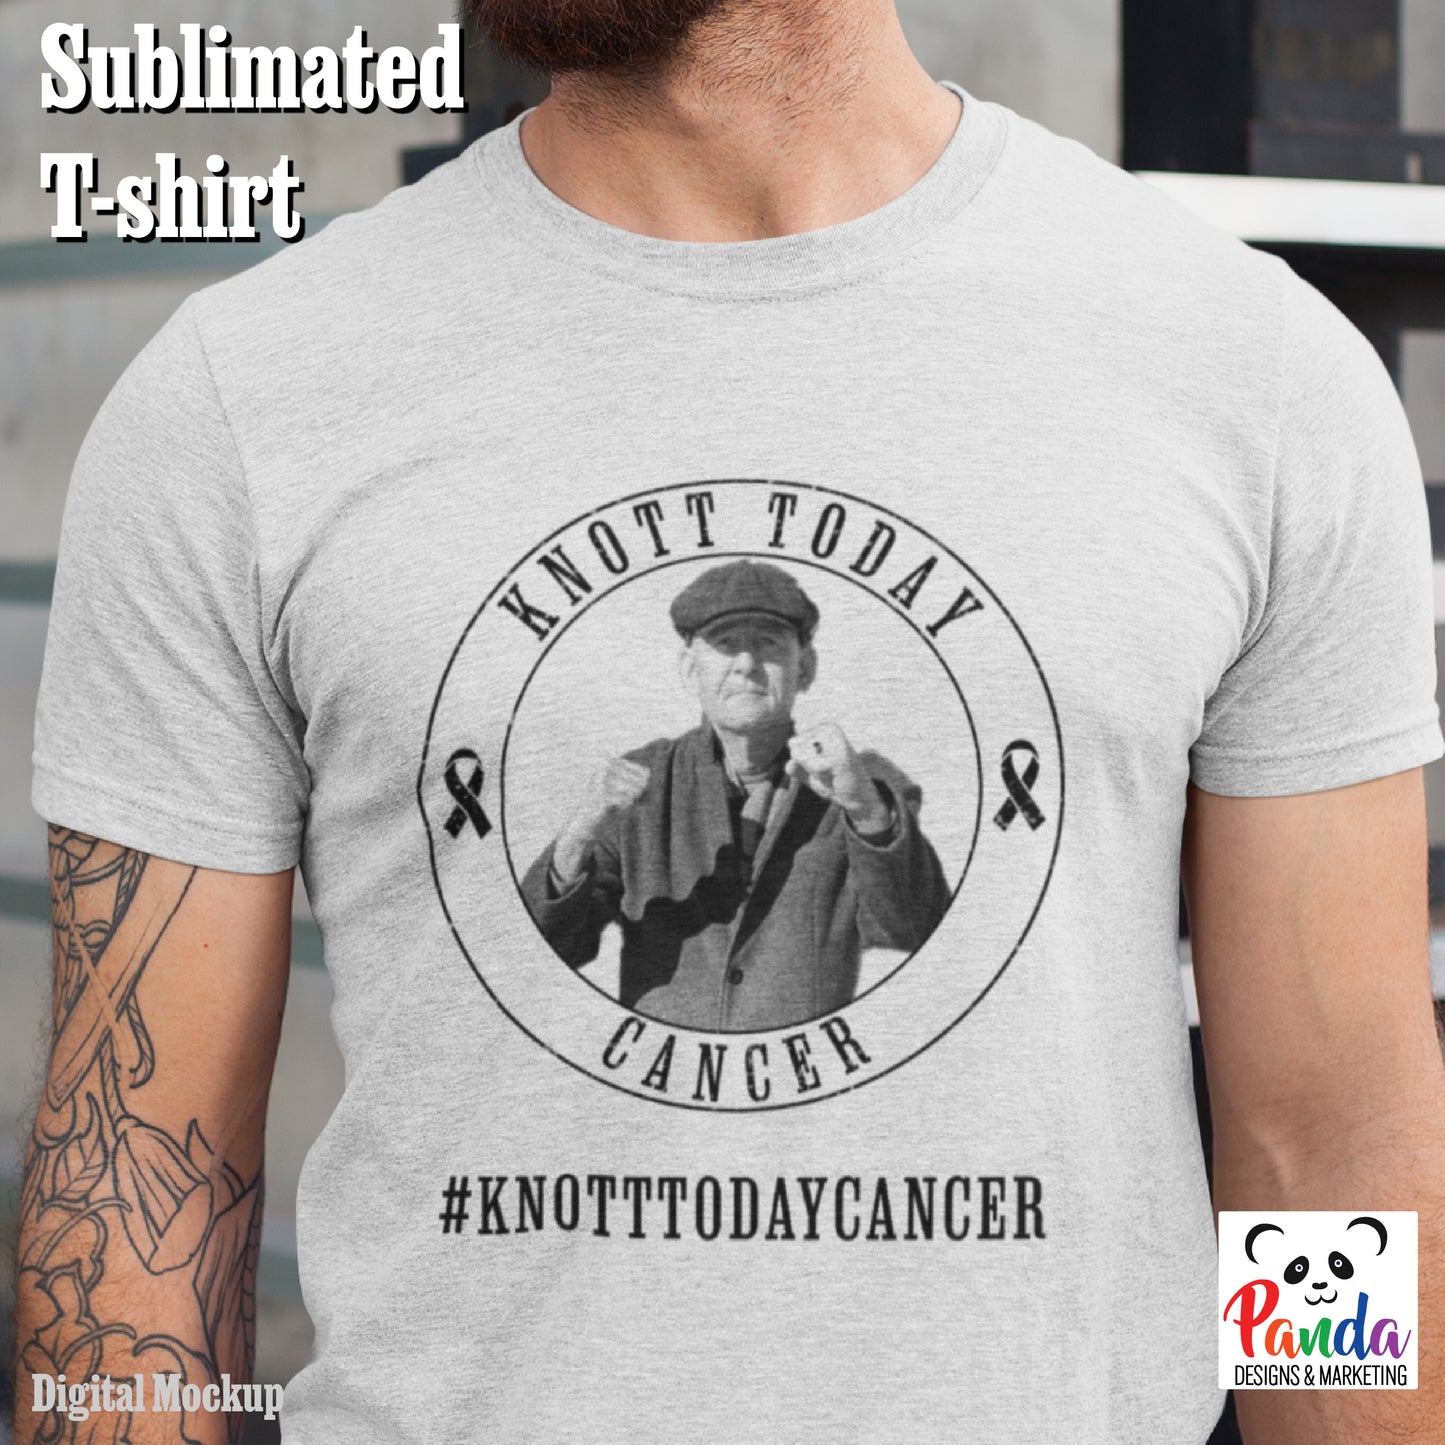 Knott Today Cancer Sublimated T-shirts (Short Sleeve or Long Sleeve)